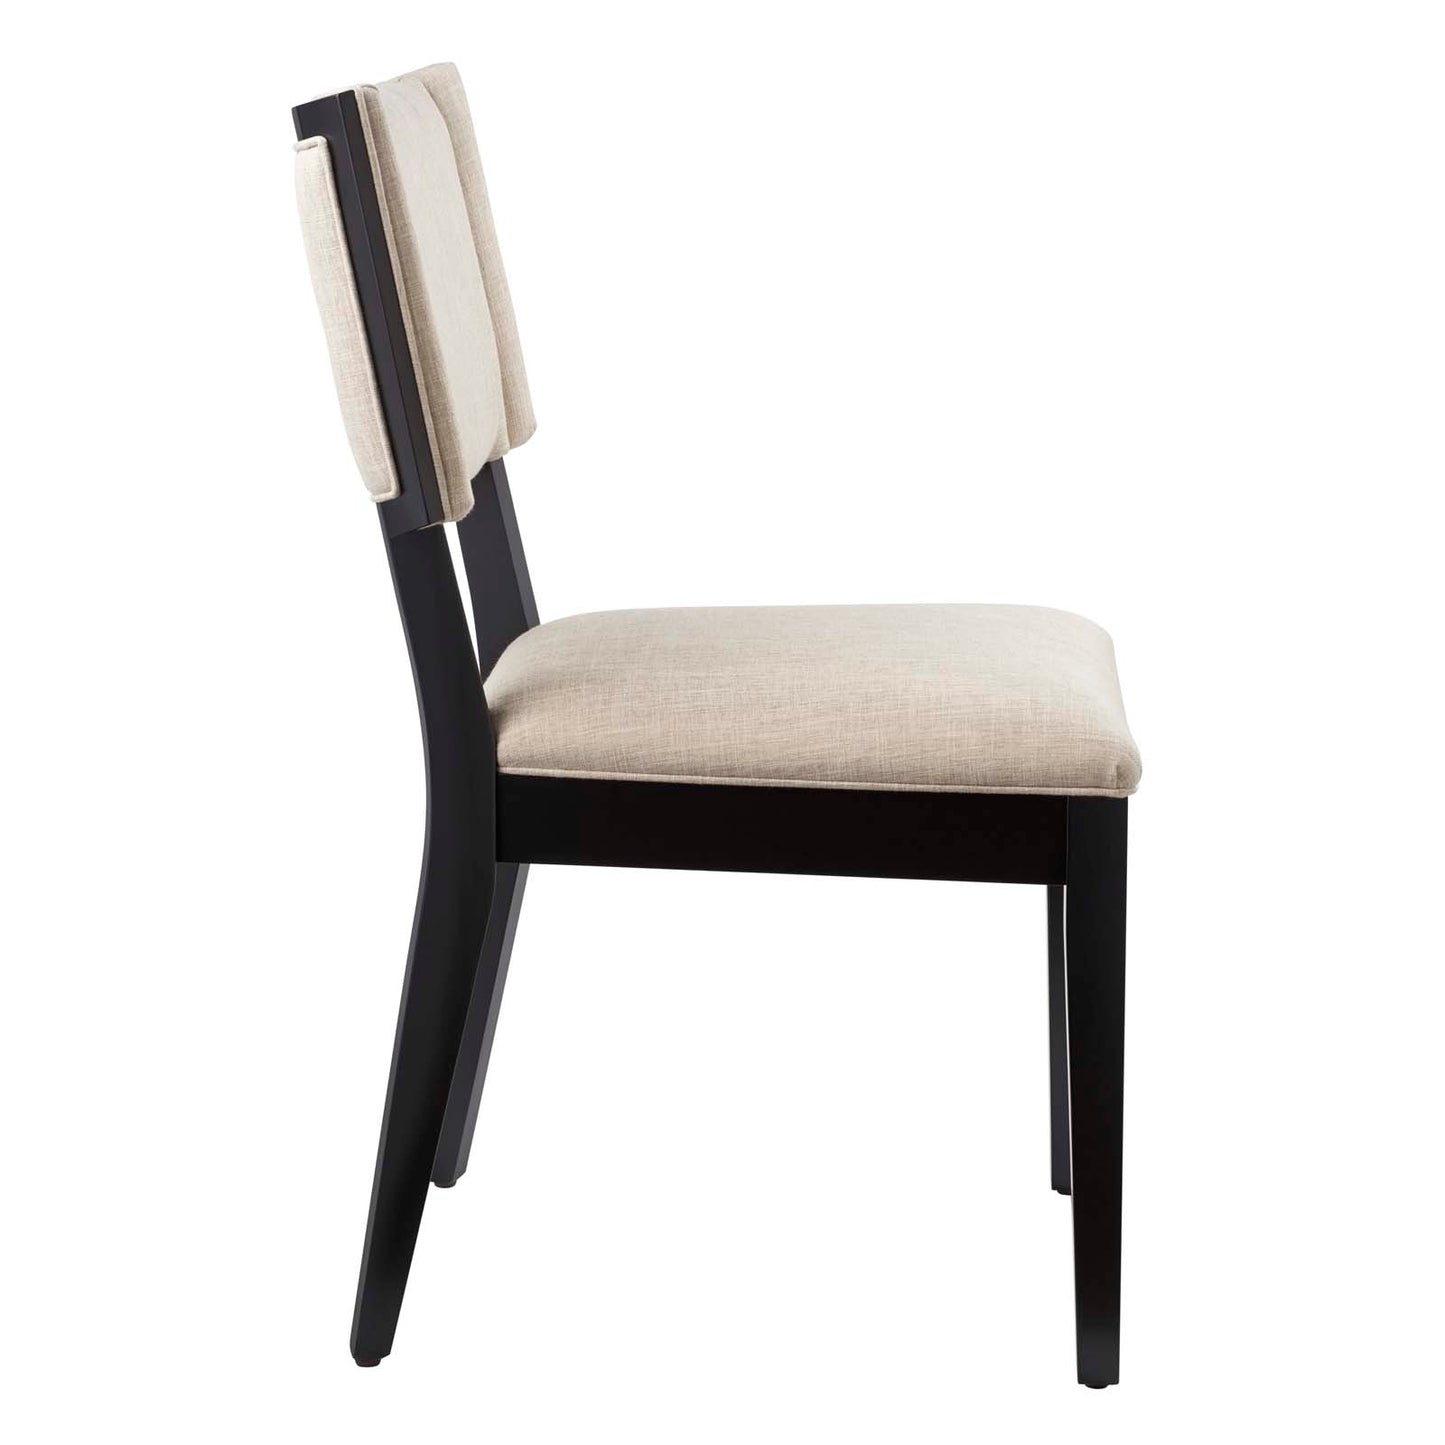 Esquire Dining Chairs - Set of 2 Beige EEI-4559-BEI